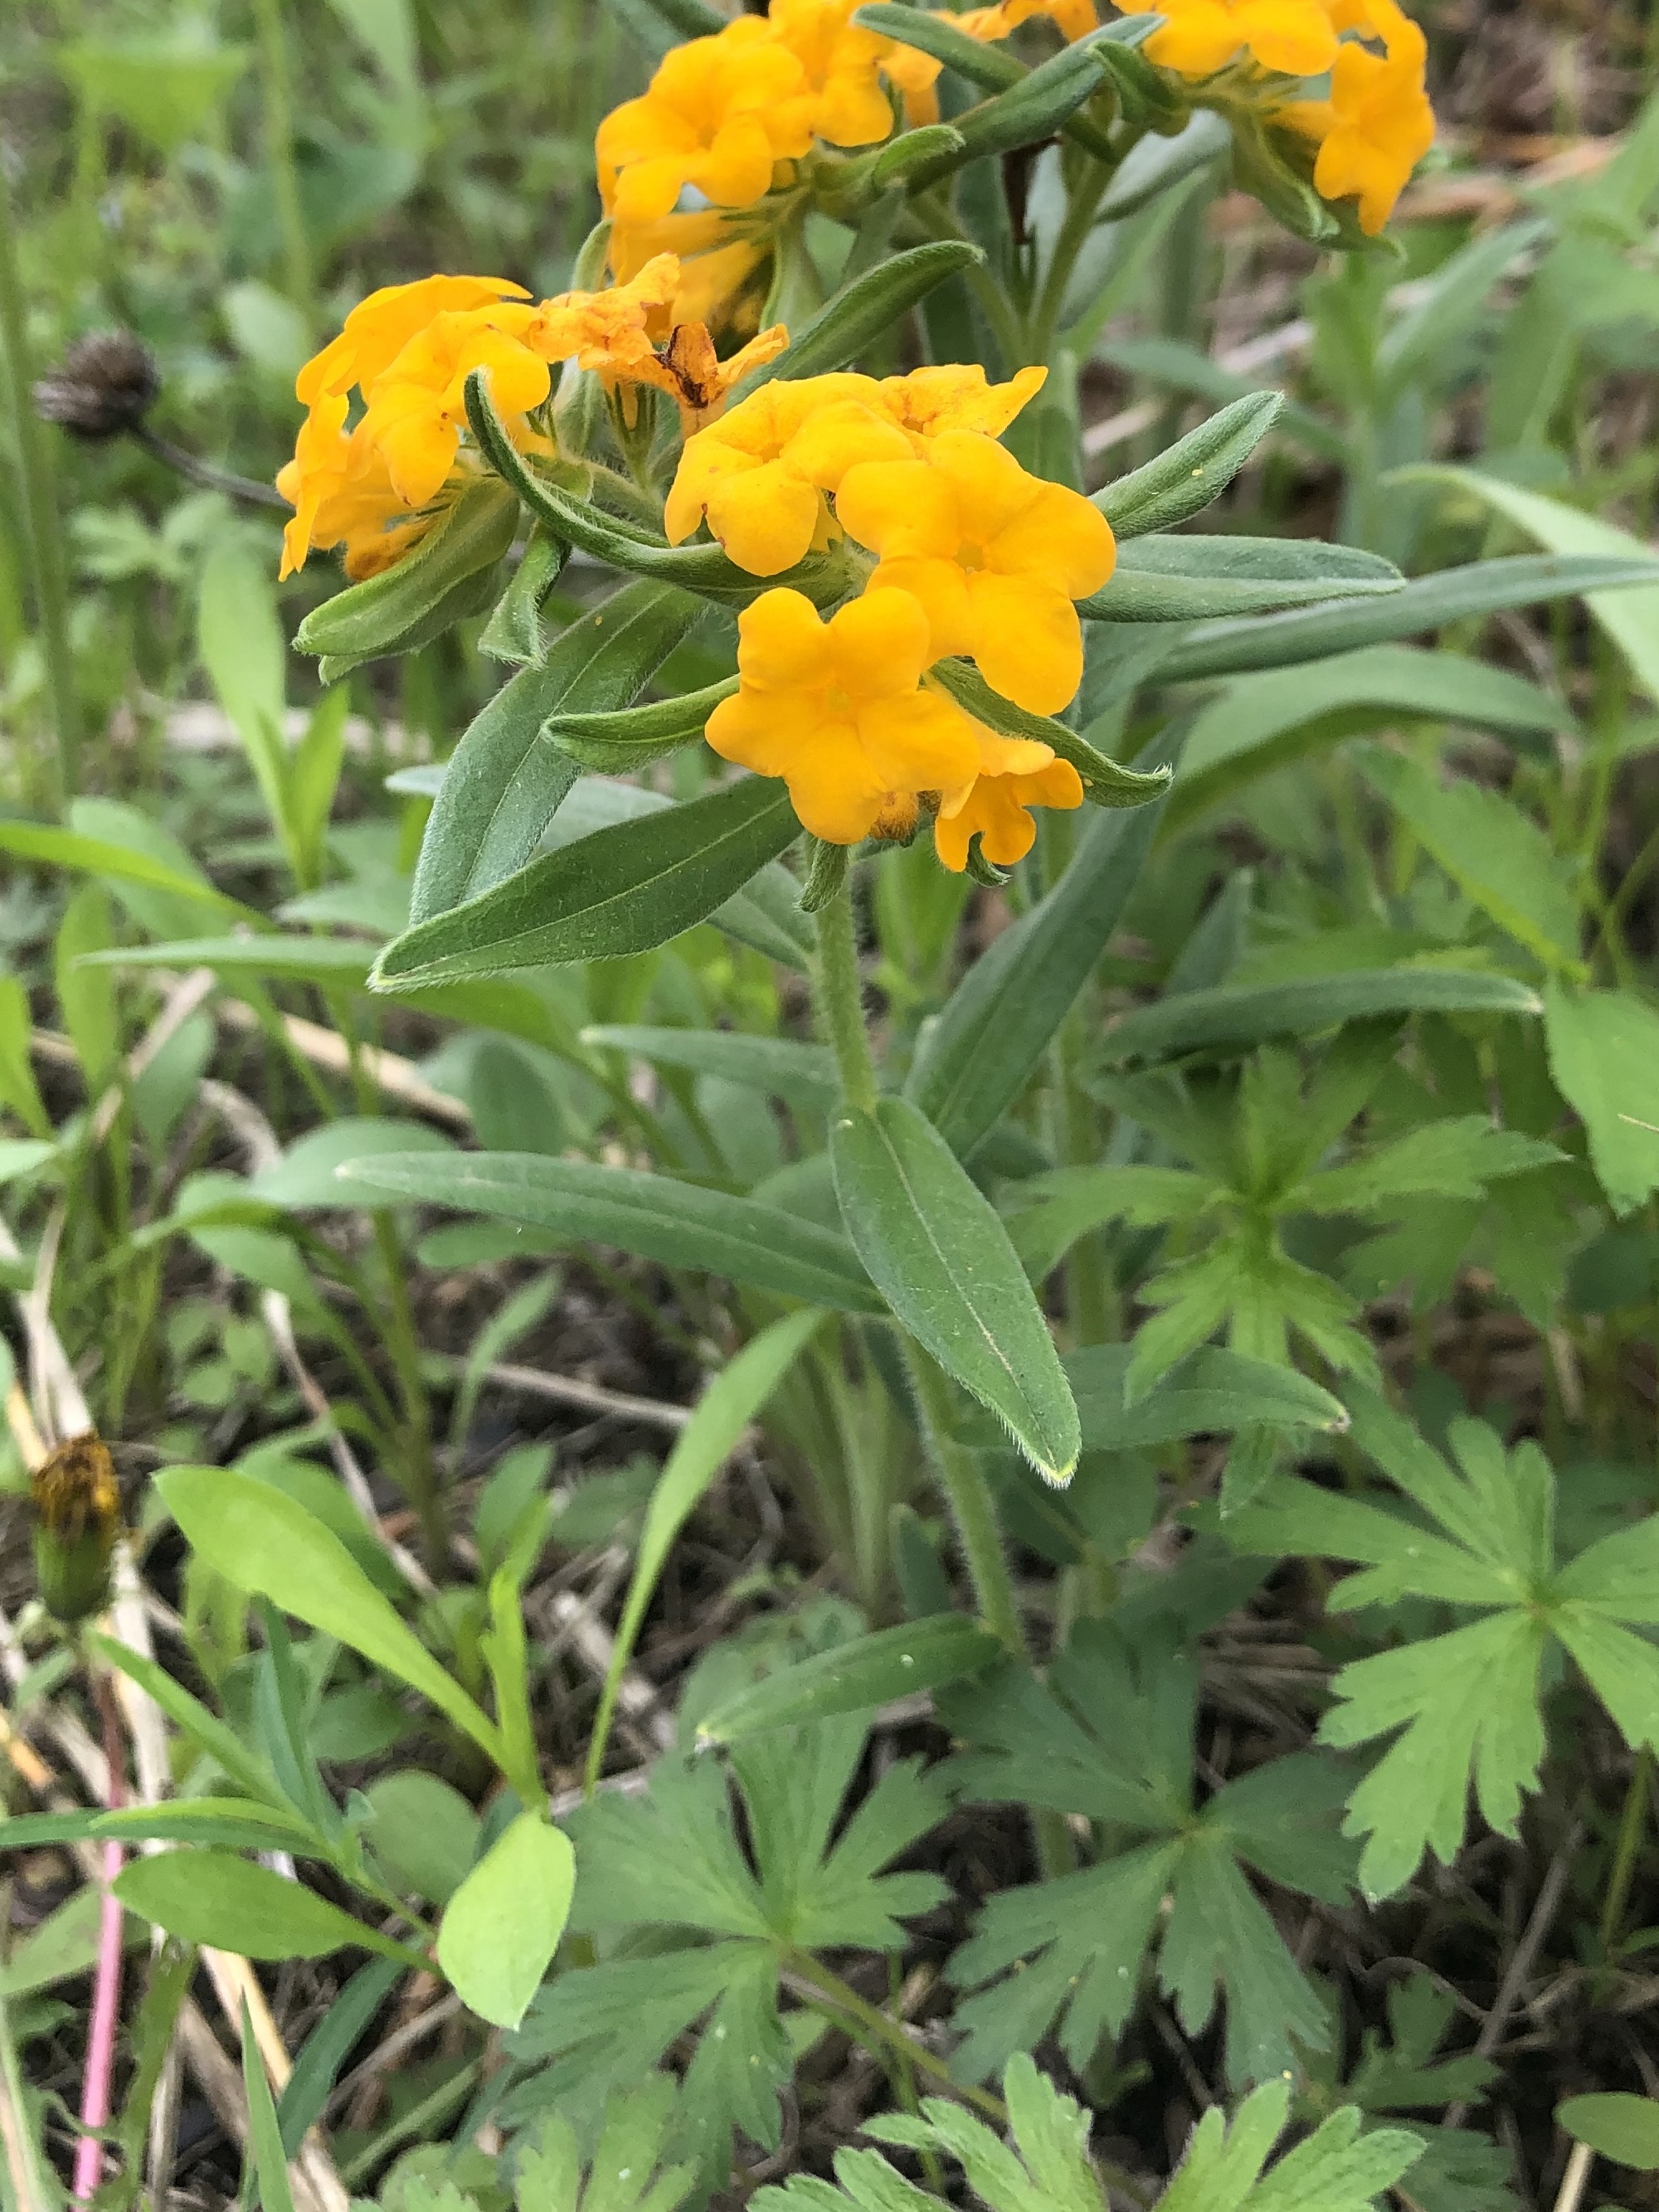 Hoary Puccoon in the Curtis Prairie in the University of Wisconsin-Madison Arboretum in Madison, Wisconsin on May 21, 2022.